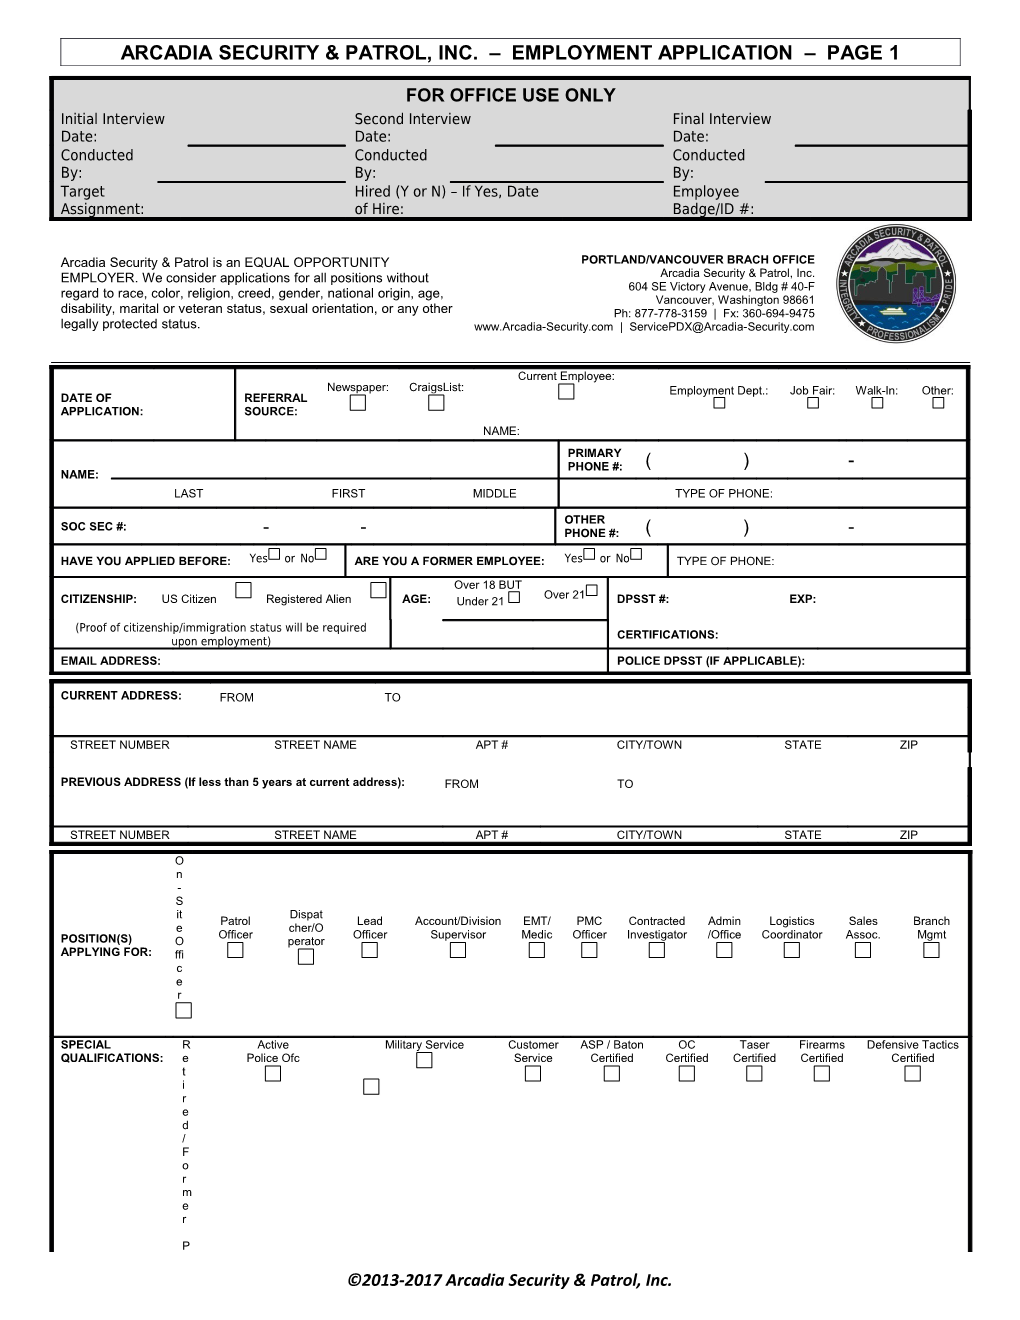 Arcadia Security & Patrol, Inc. Employment Application Page 1